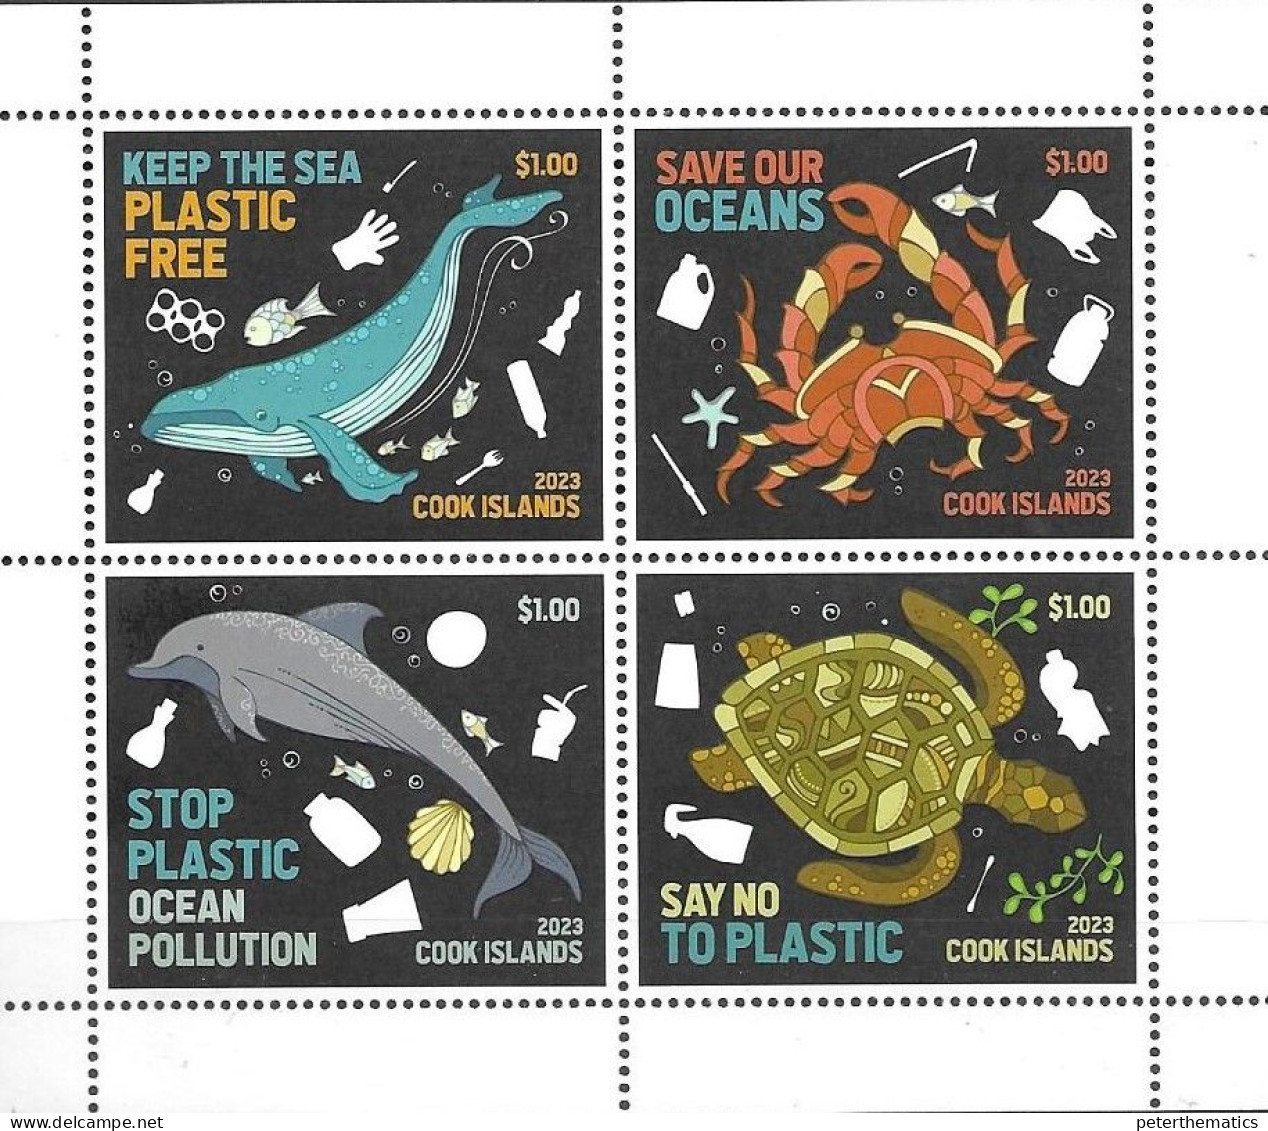 COOK ISLANDS, 2023, MNH, STOP PLASTIC POLLUTION, WHALES, DOLPHINS, TURTLES, CRABS,  SHEETLET OF 4v - Turtles